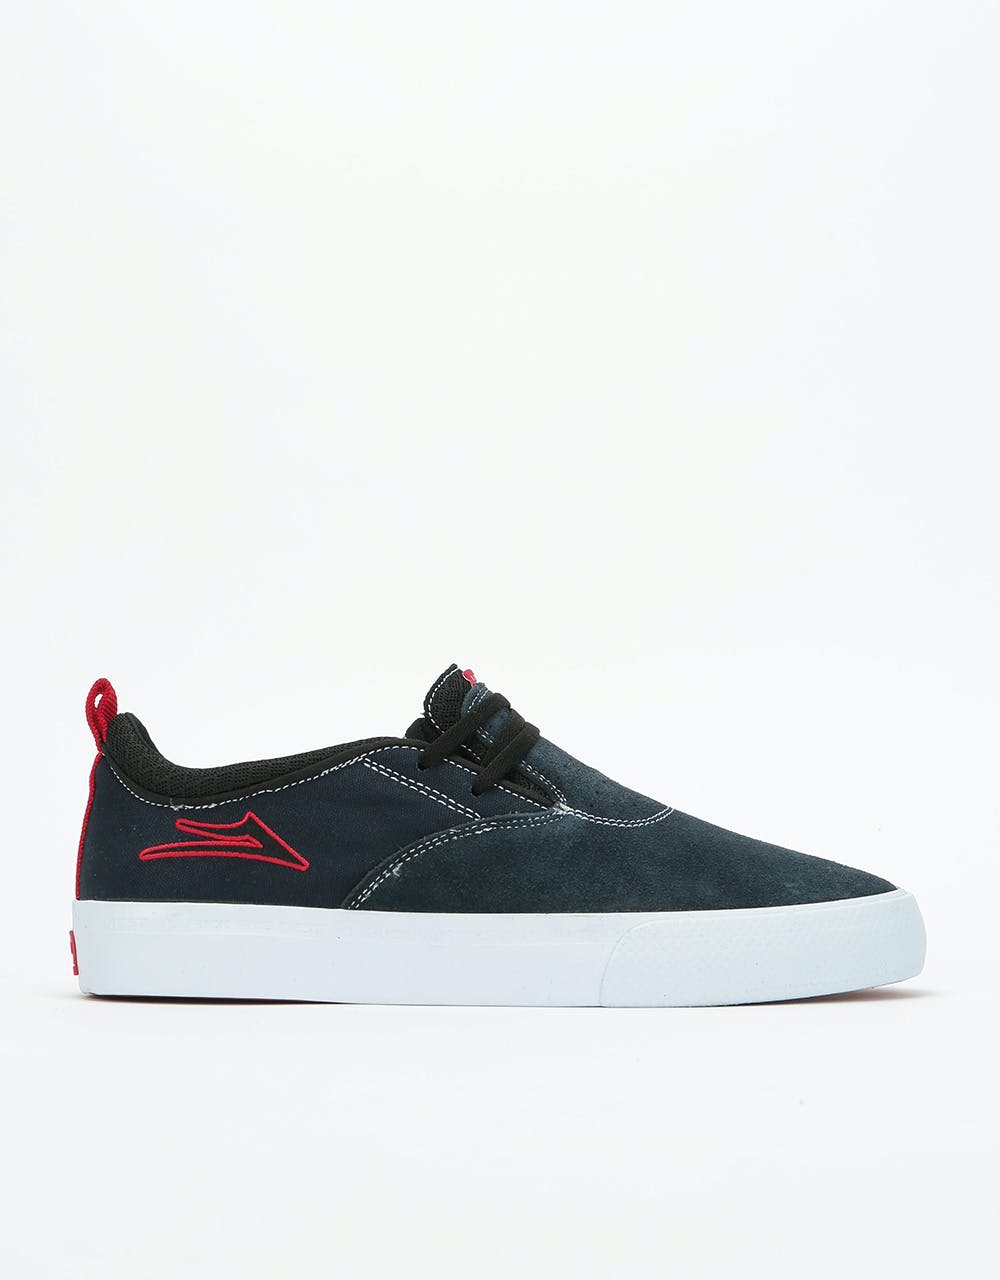 Lakai x Independent Riley 2 Skate Shoes - Navy Suede